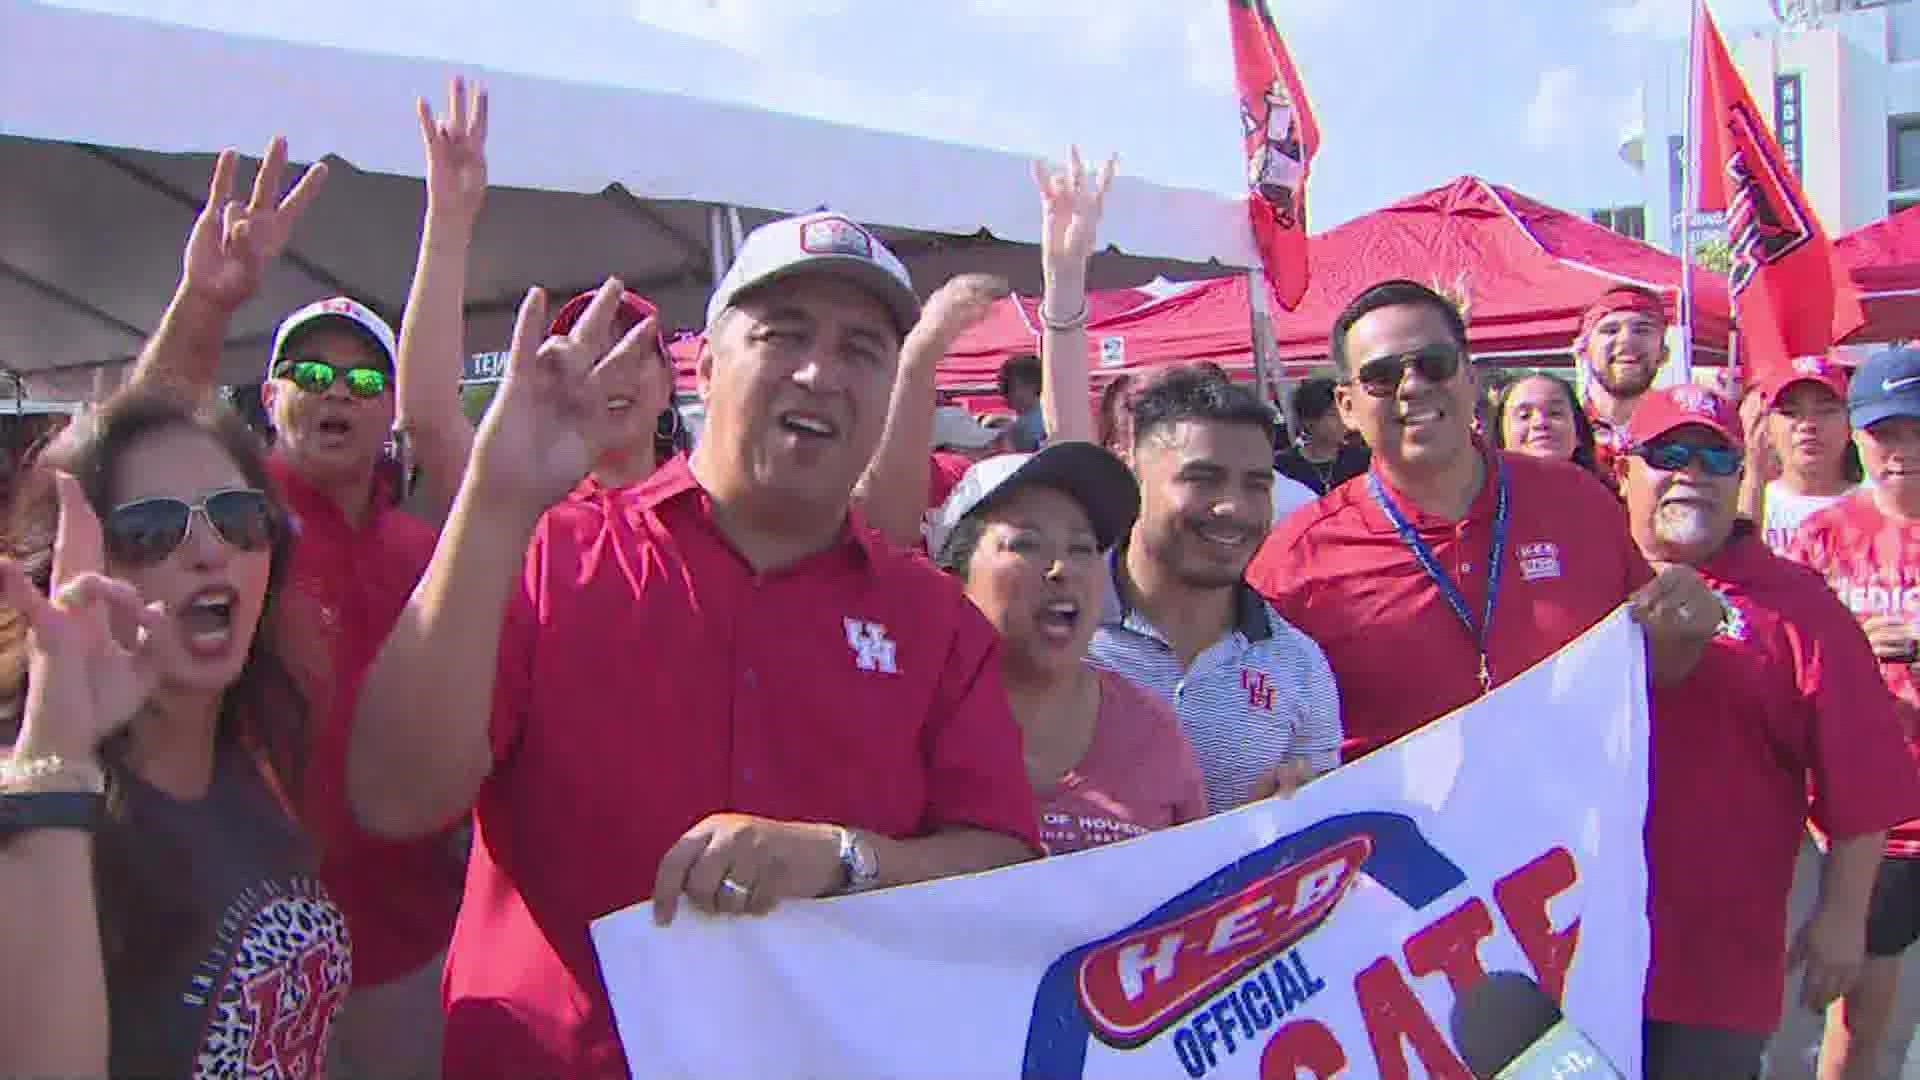 University of Houston fans say the university and the city are ready for the Cougars to move to the Big 12.